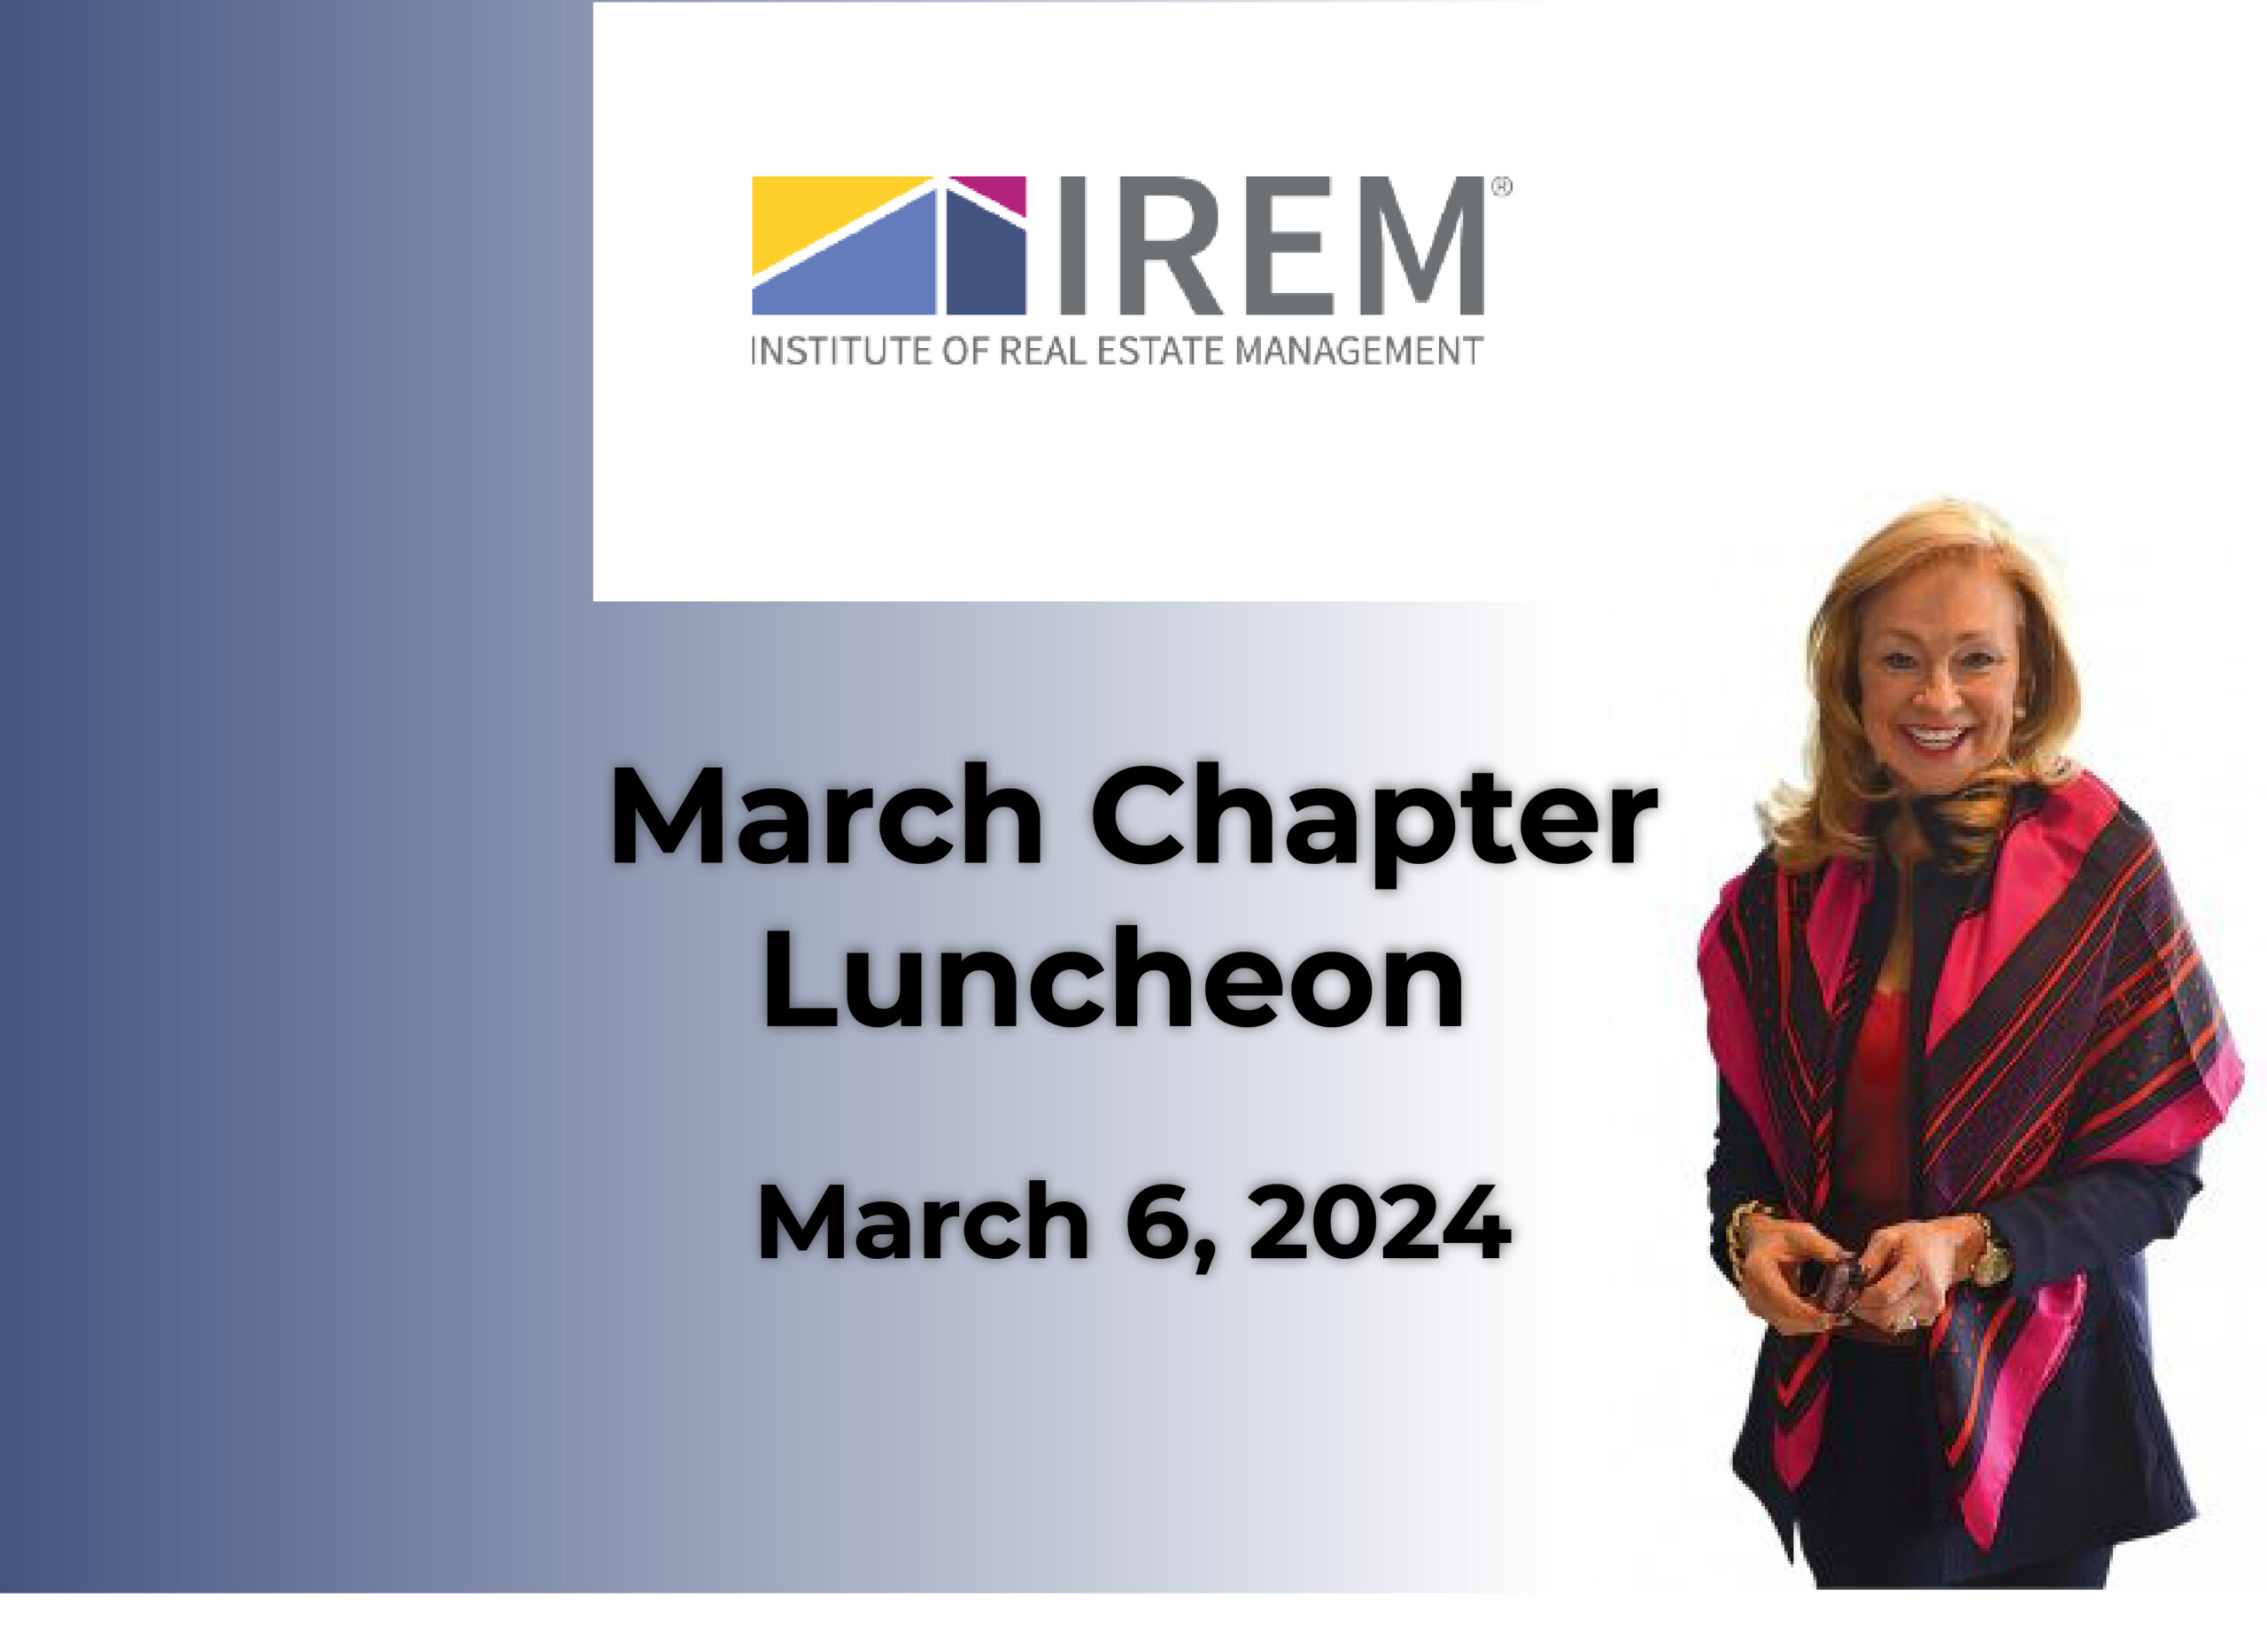 IREM March Chapter Luncheon